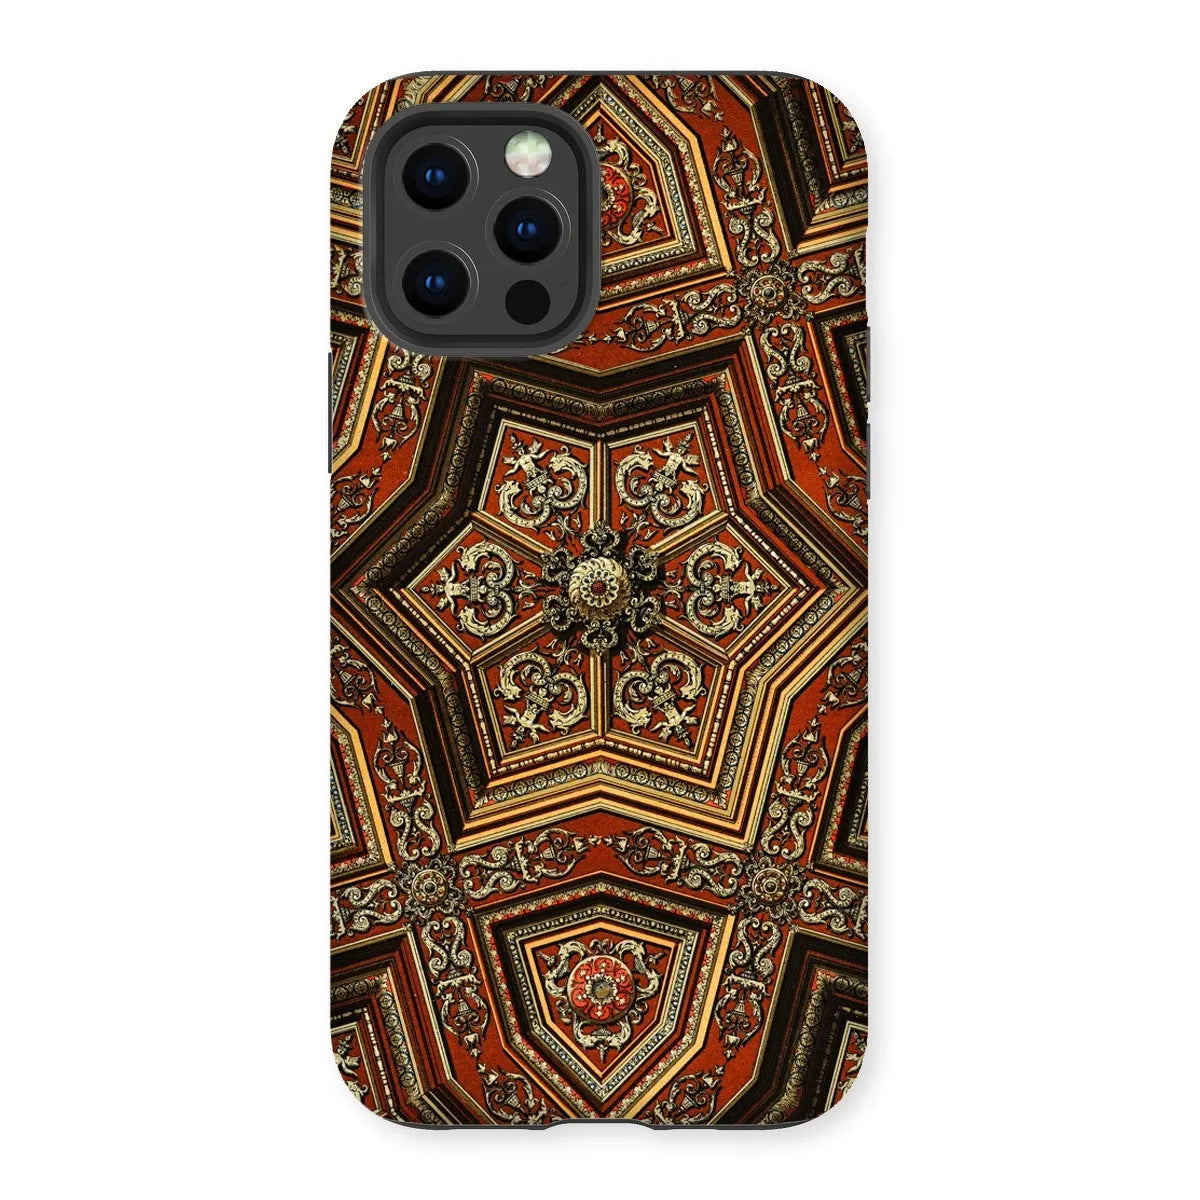 Renaissance Pattern By Auguste Racinet Tough Phone Case - Iphone 12 Pro / Gloss - Mobile Phone Cases - Aesthetic Art